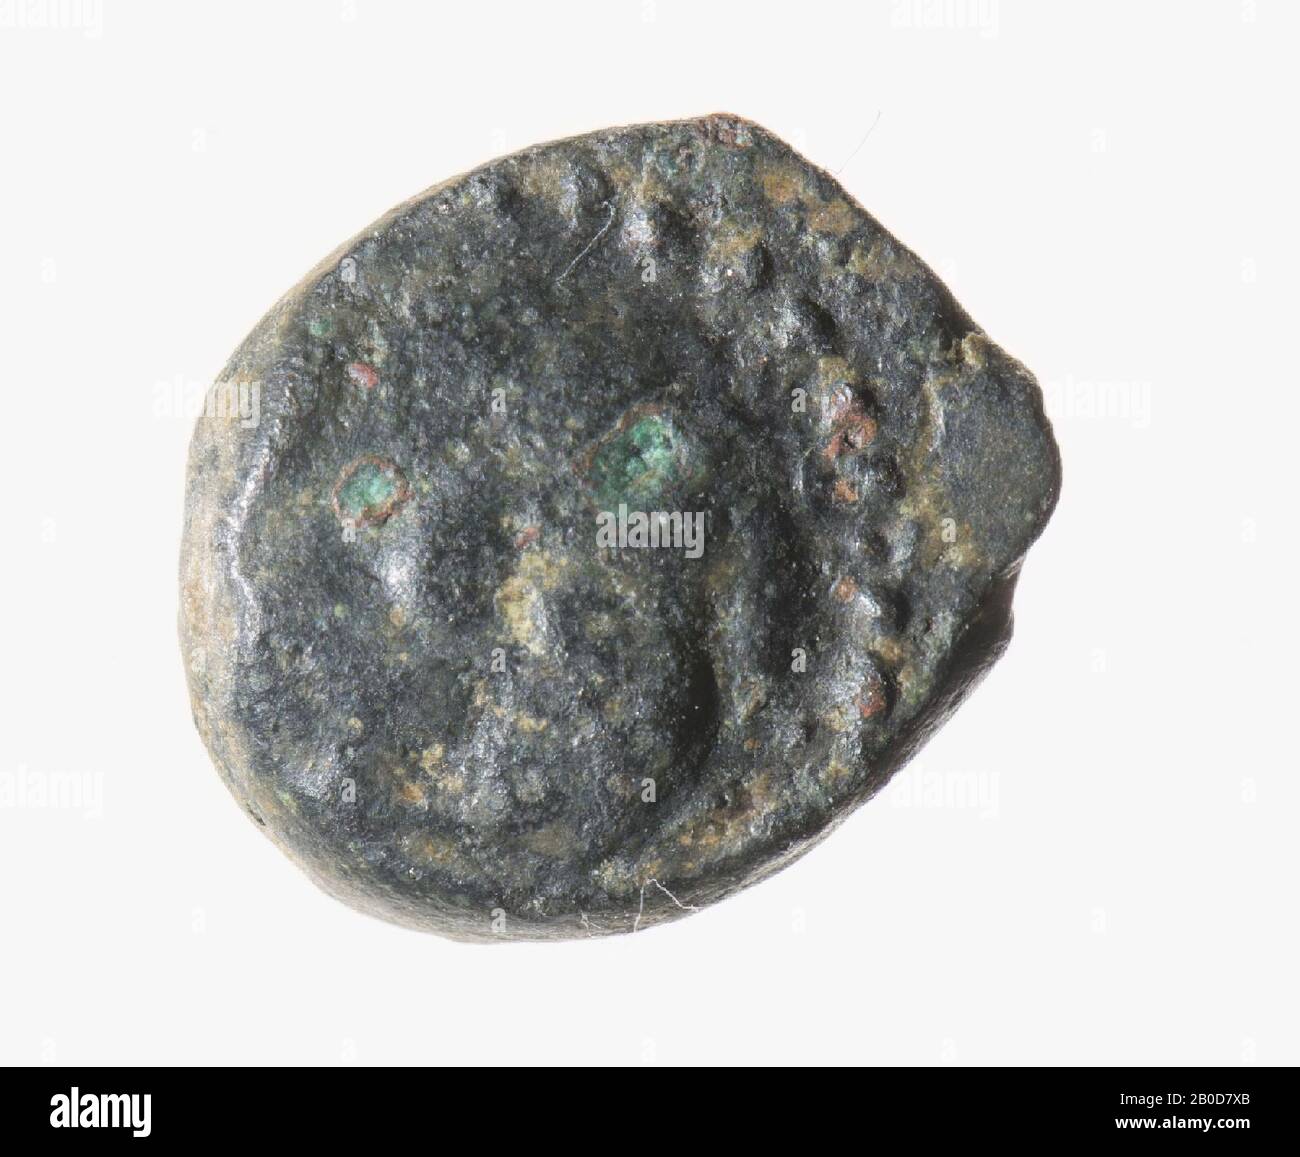 Classical antiquity, coin, by Alexander the Great, metal, bronze, diam, 1 cm, wt., 1.59 grams, 336-323 BC Stock Photo